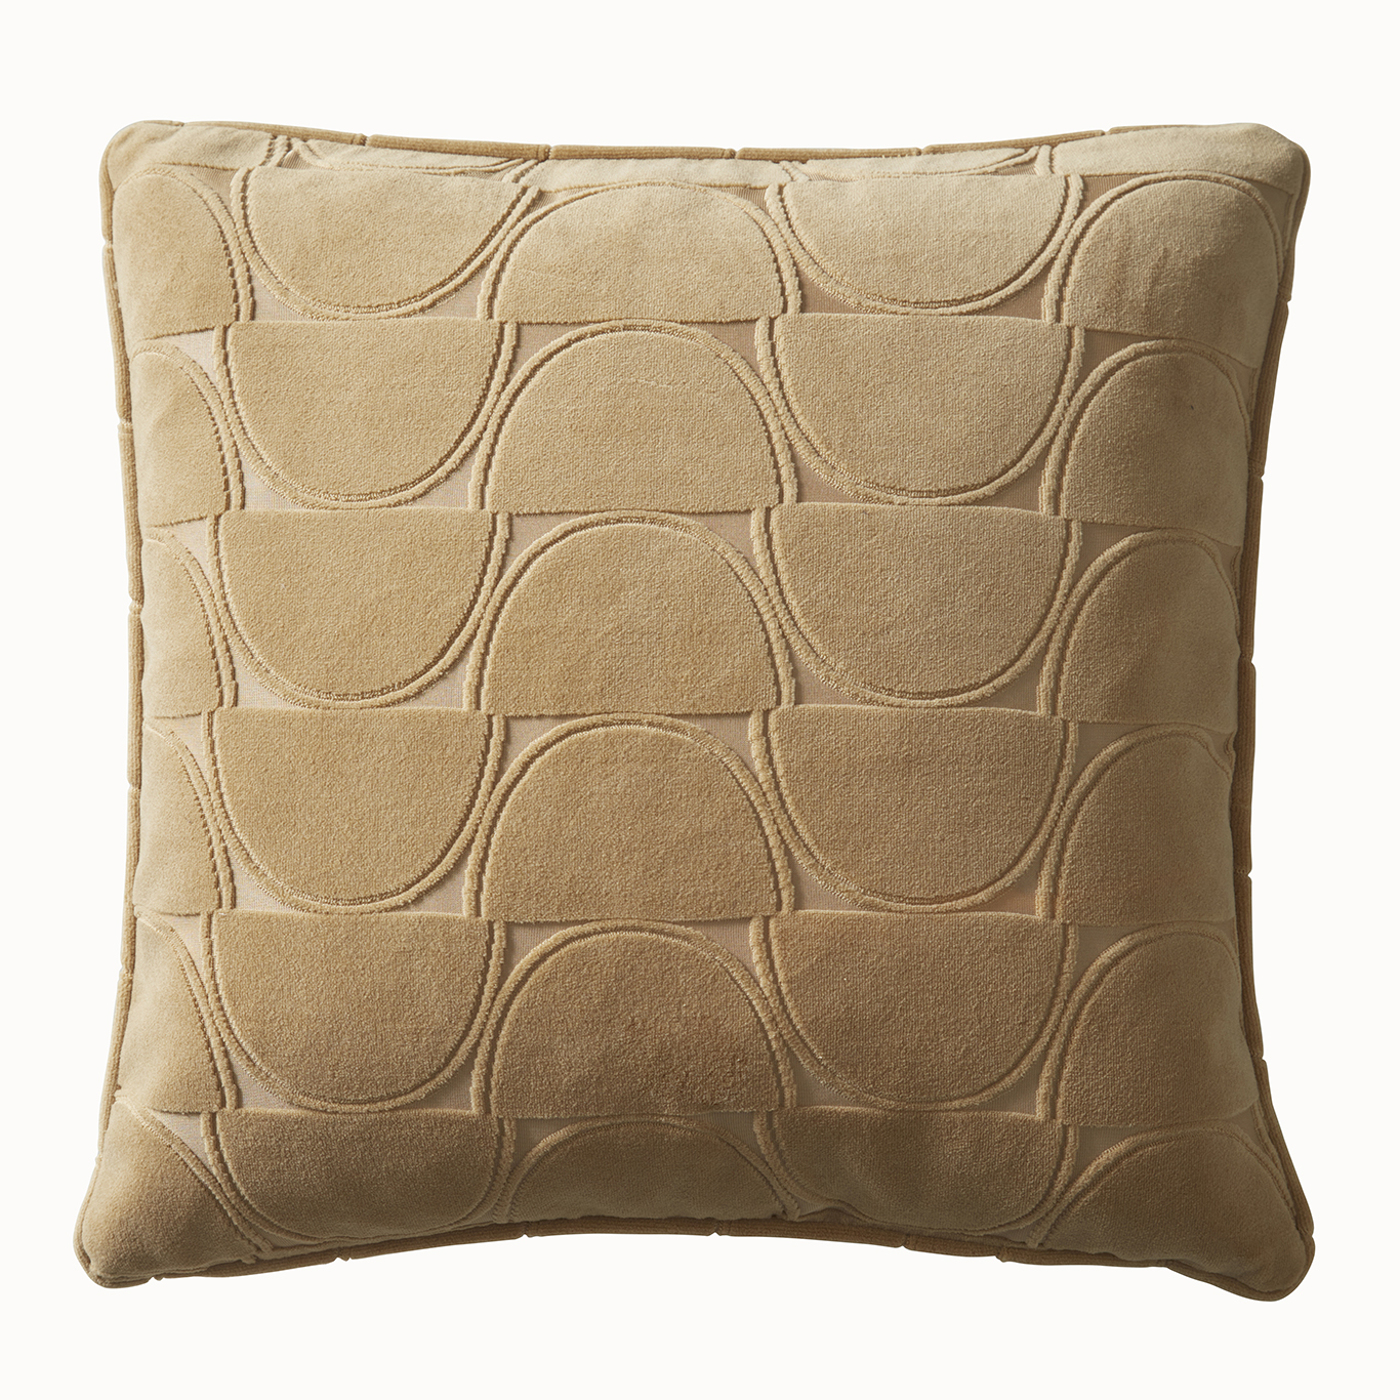 Lucca Ochre Cushions by STG